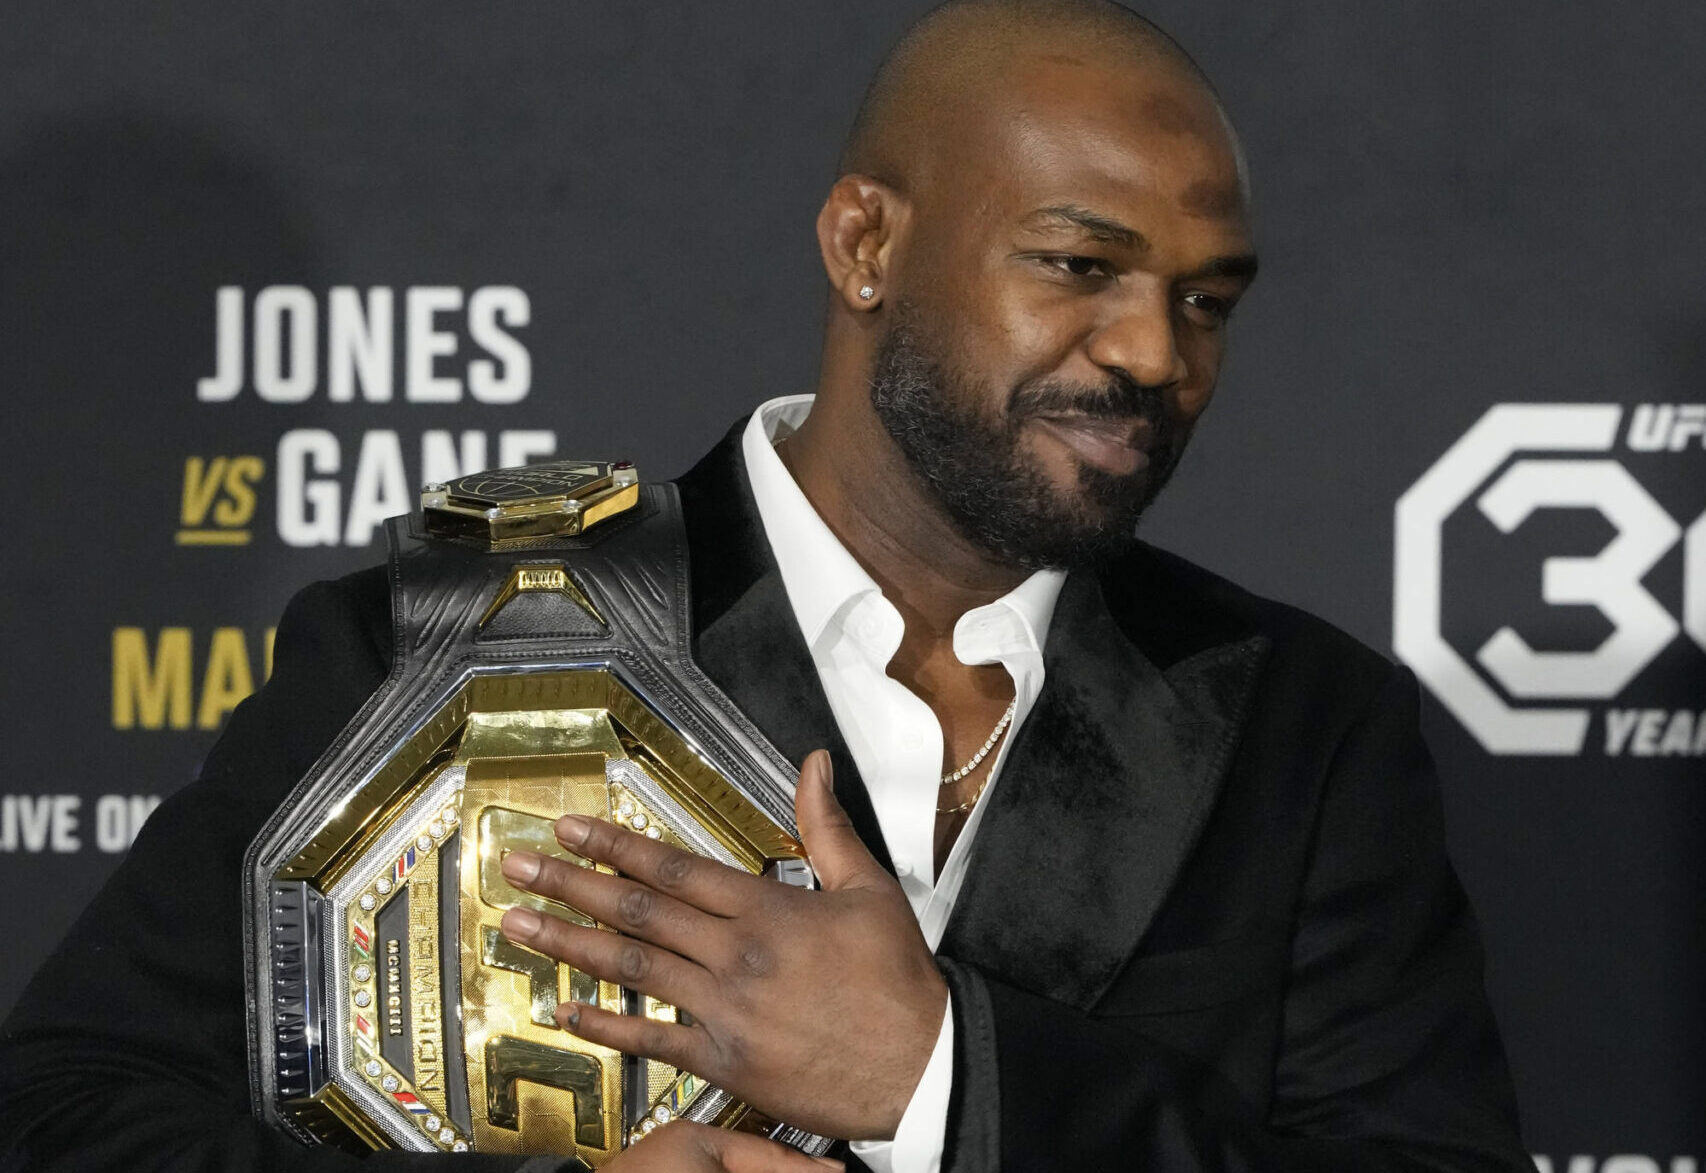 New Ufc Champ Wants Jon Jones To Be Stripped Asks Ufc To Stop Protecting Him